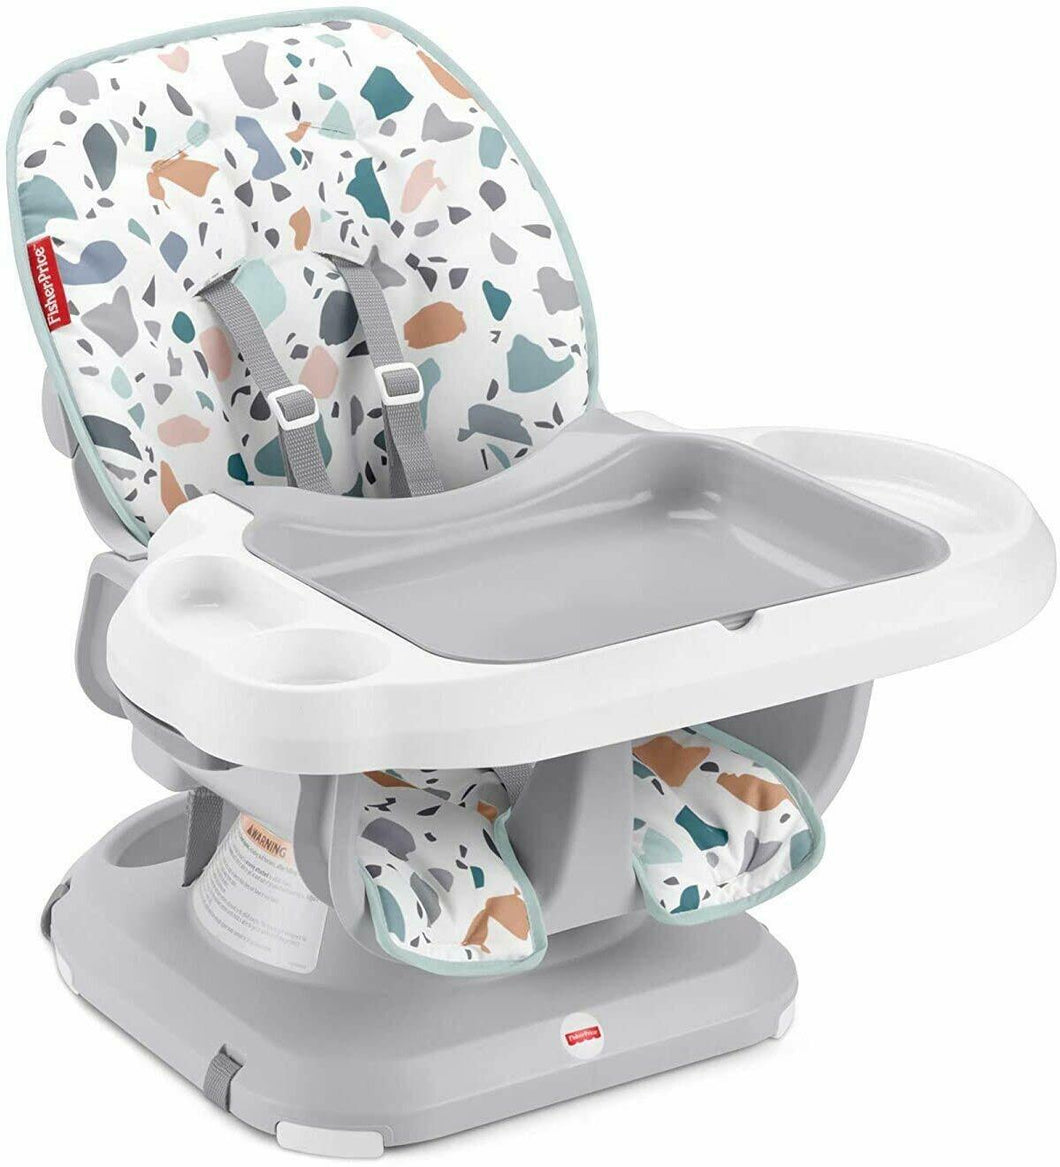 Fisher-Price SpaceSaver High Chair Infant to Toddler, Pacific Pebble